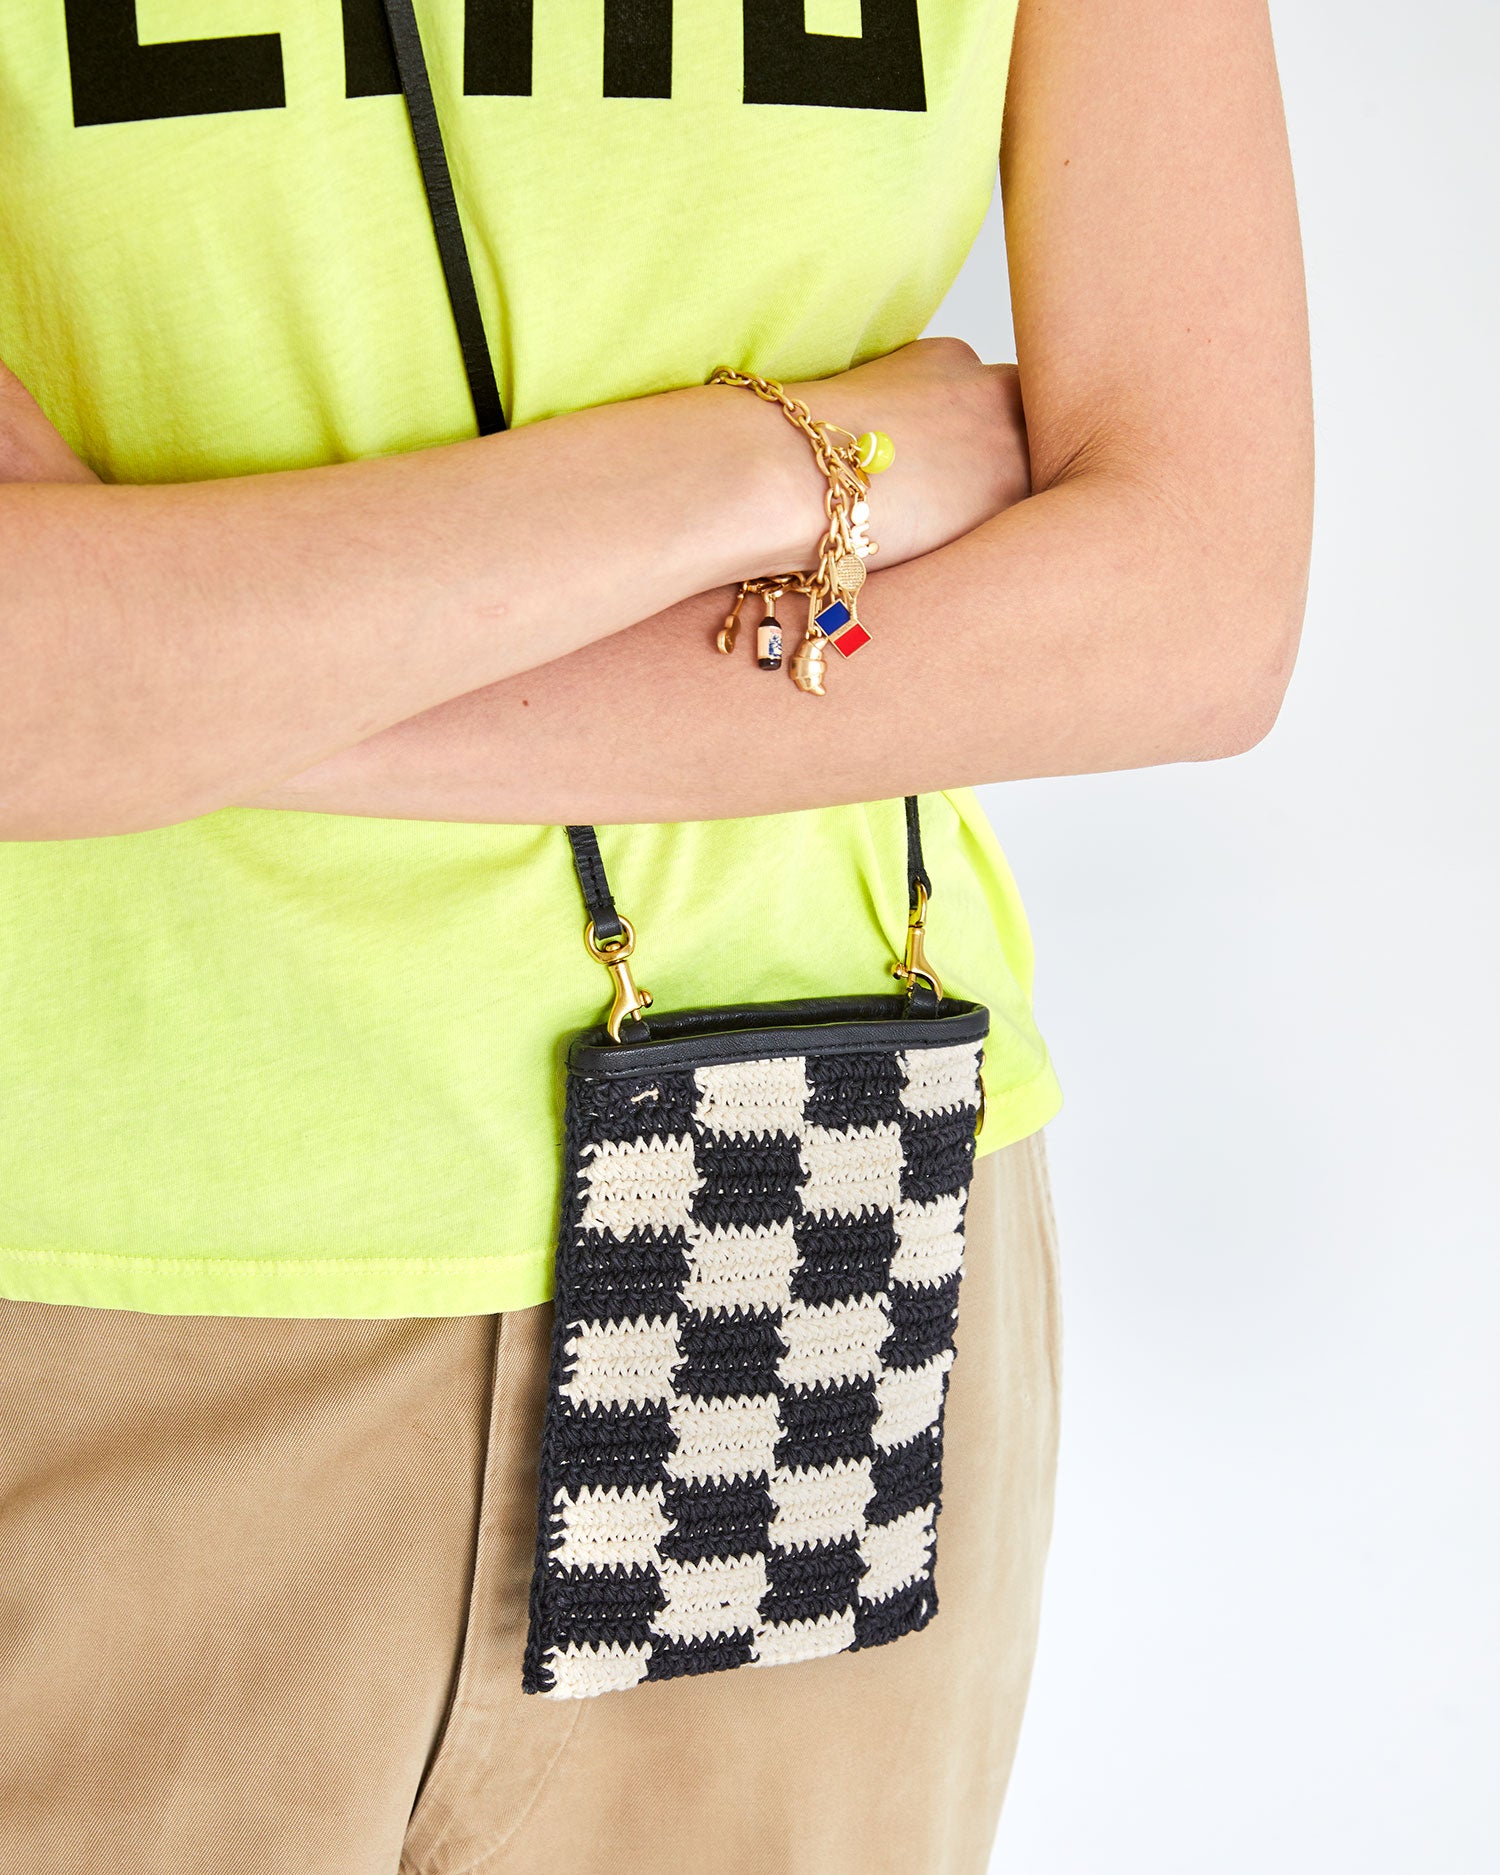 clare v summer simple tote checkered